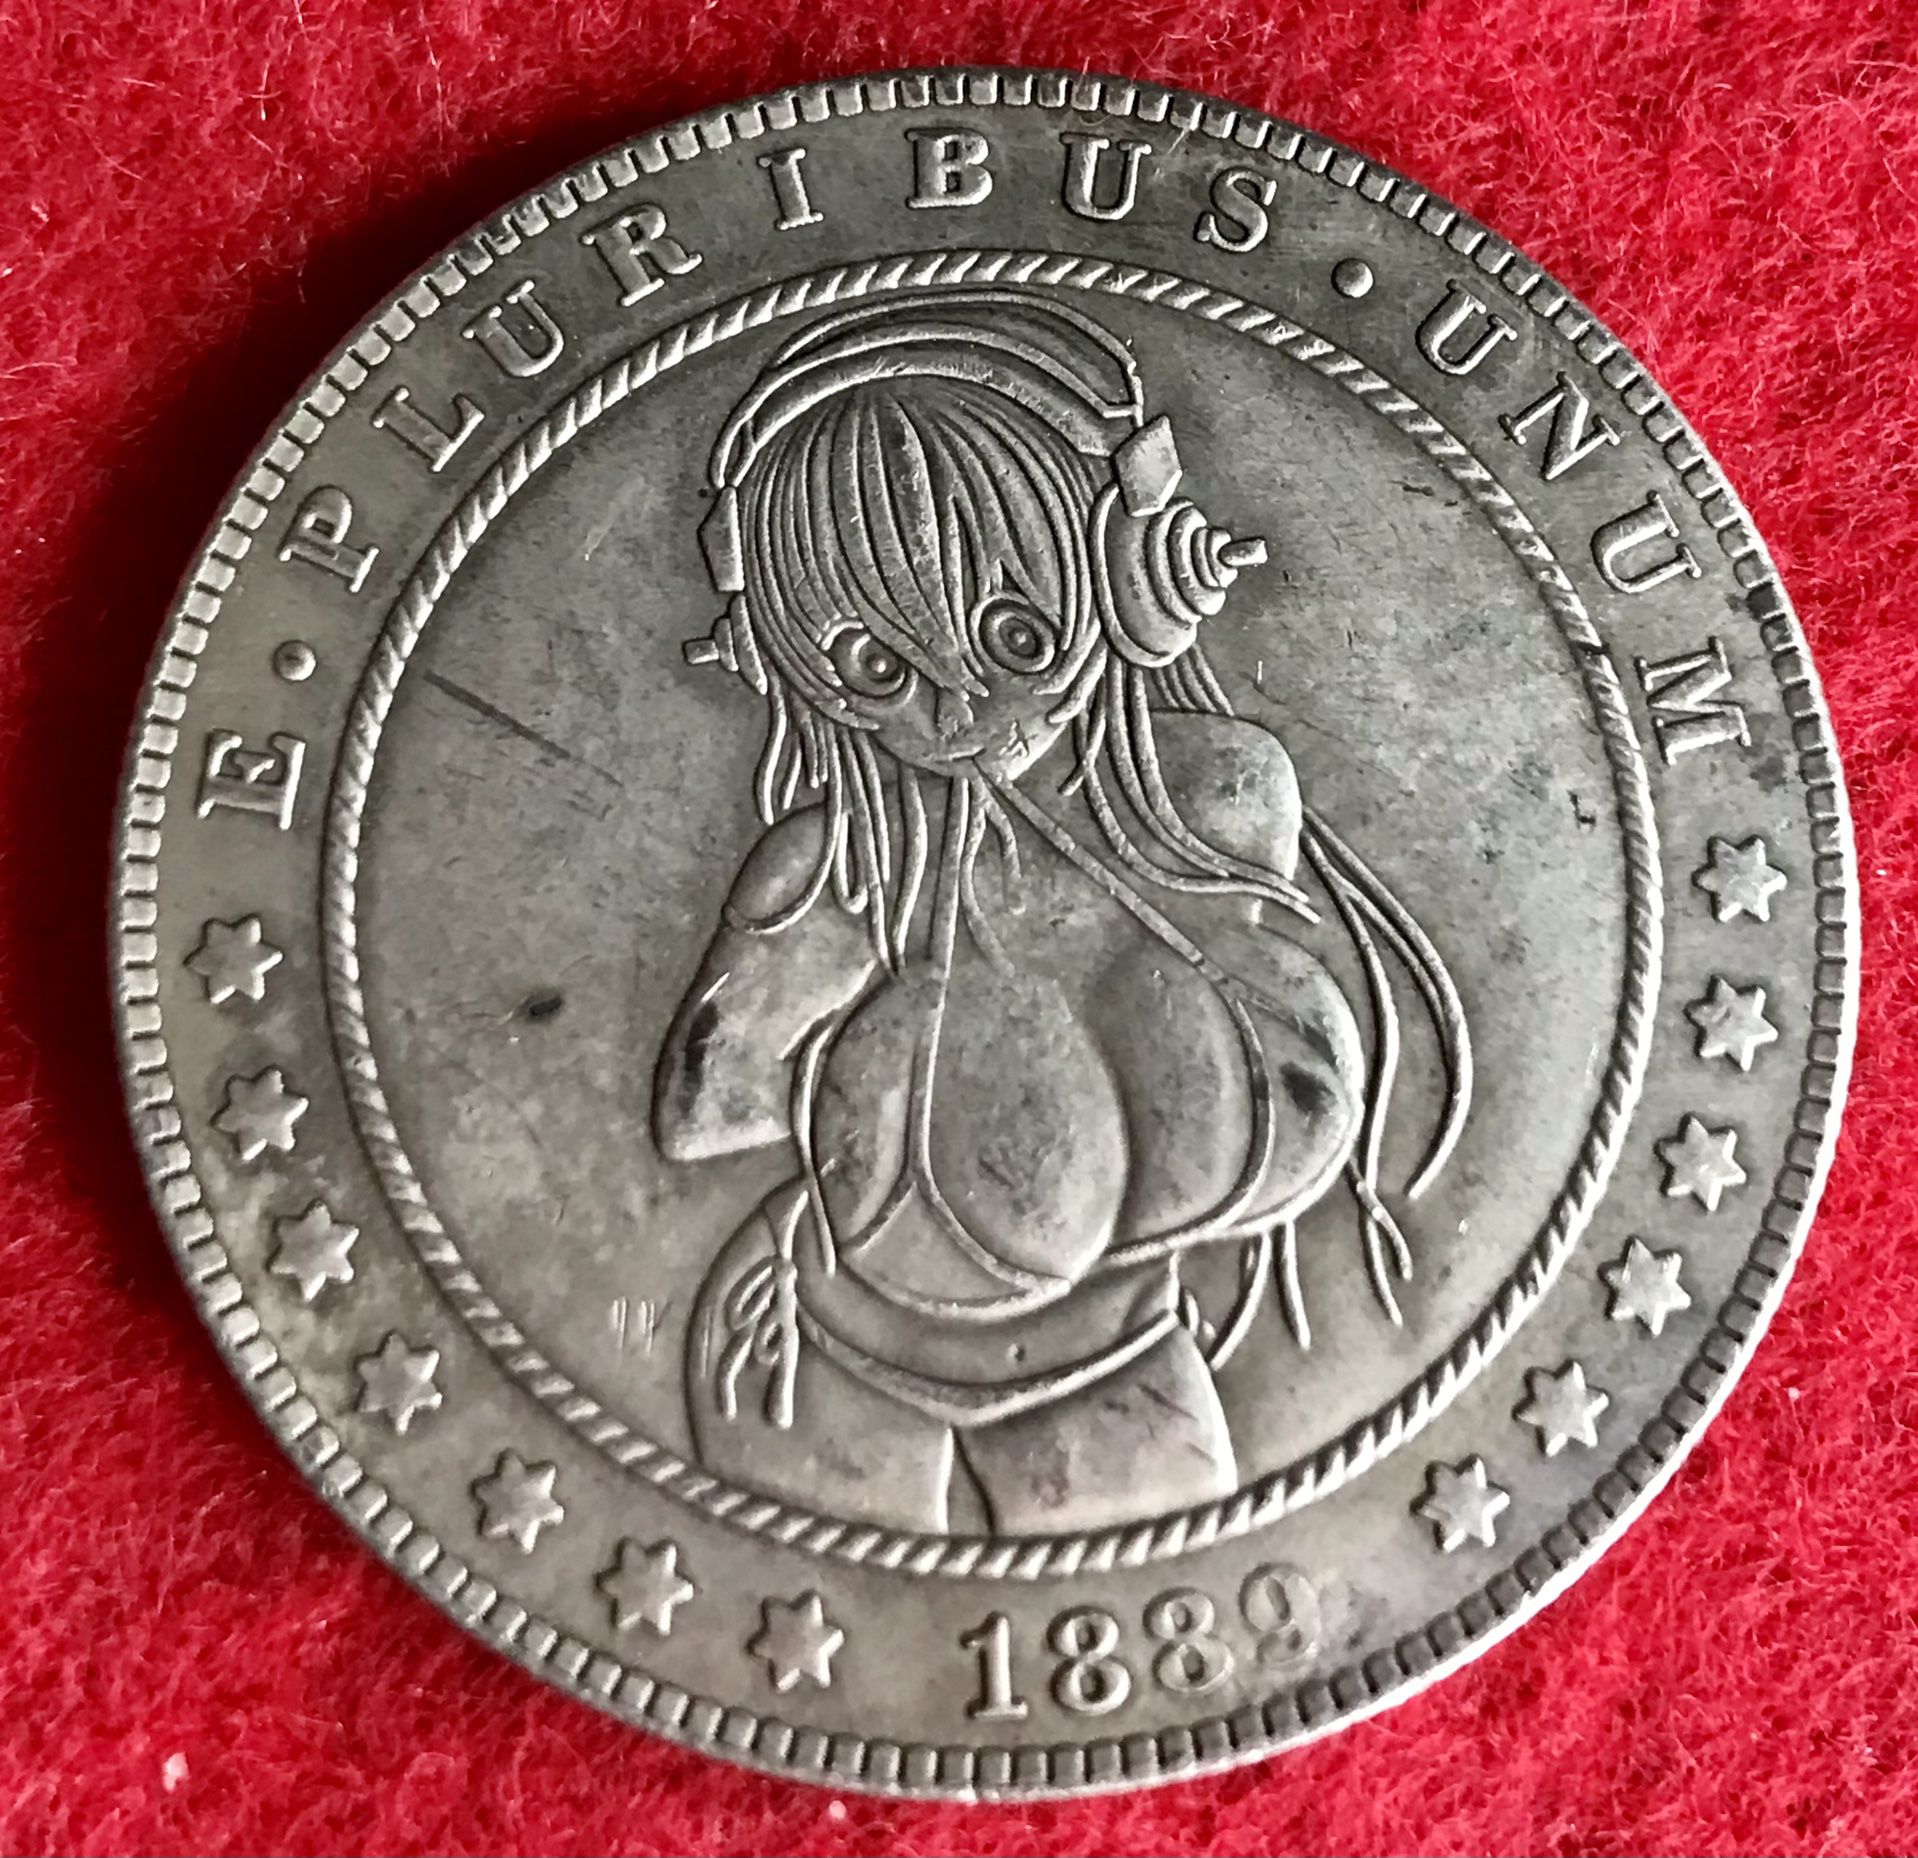 Anime Girl Coin. Only One Available! Shipped Same Day